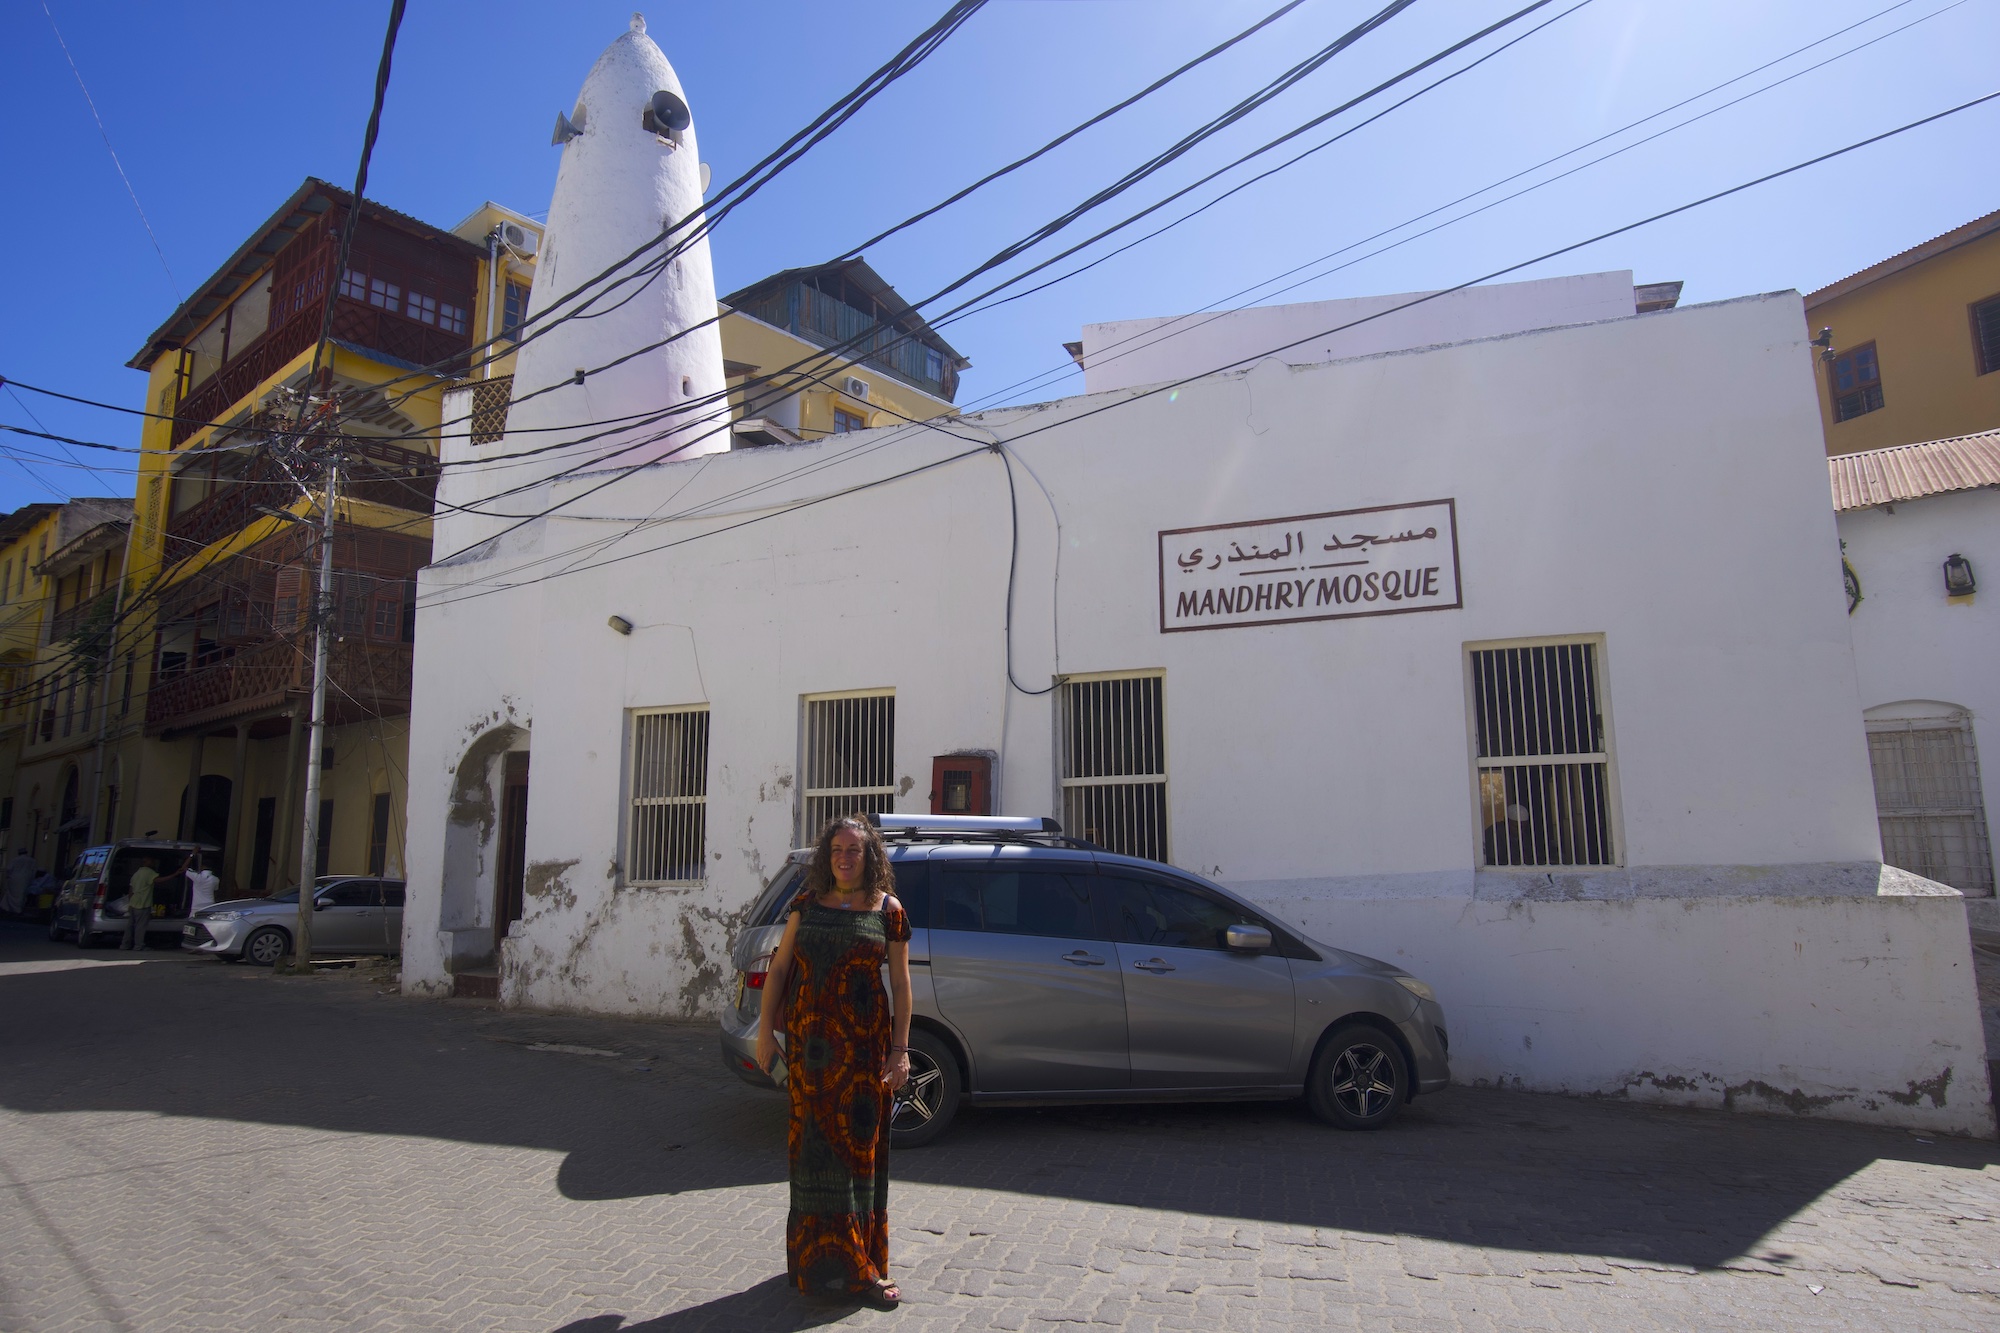 A complete view of the Mandhry mosque in Mombasa Old Town